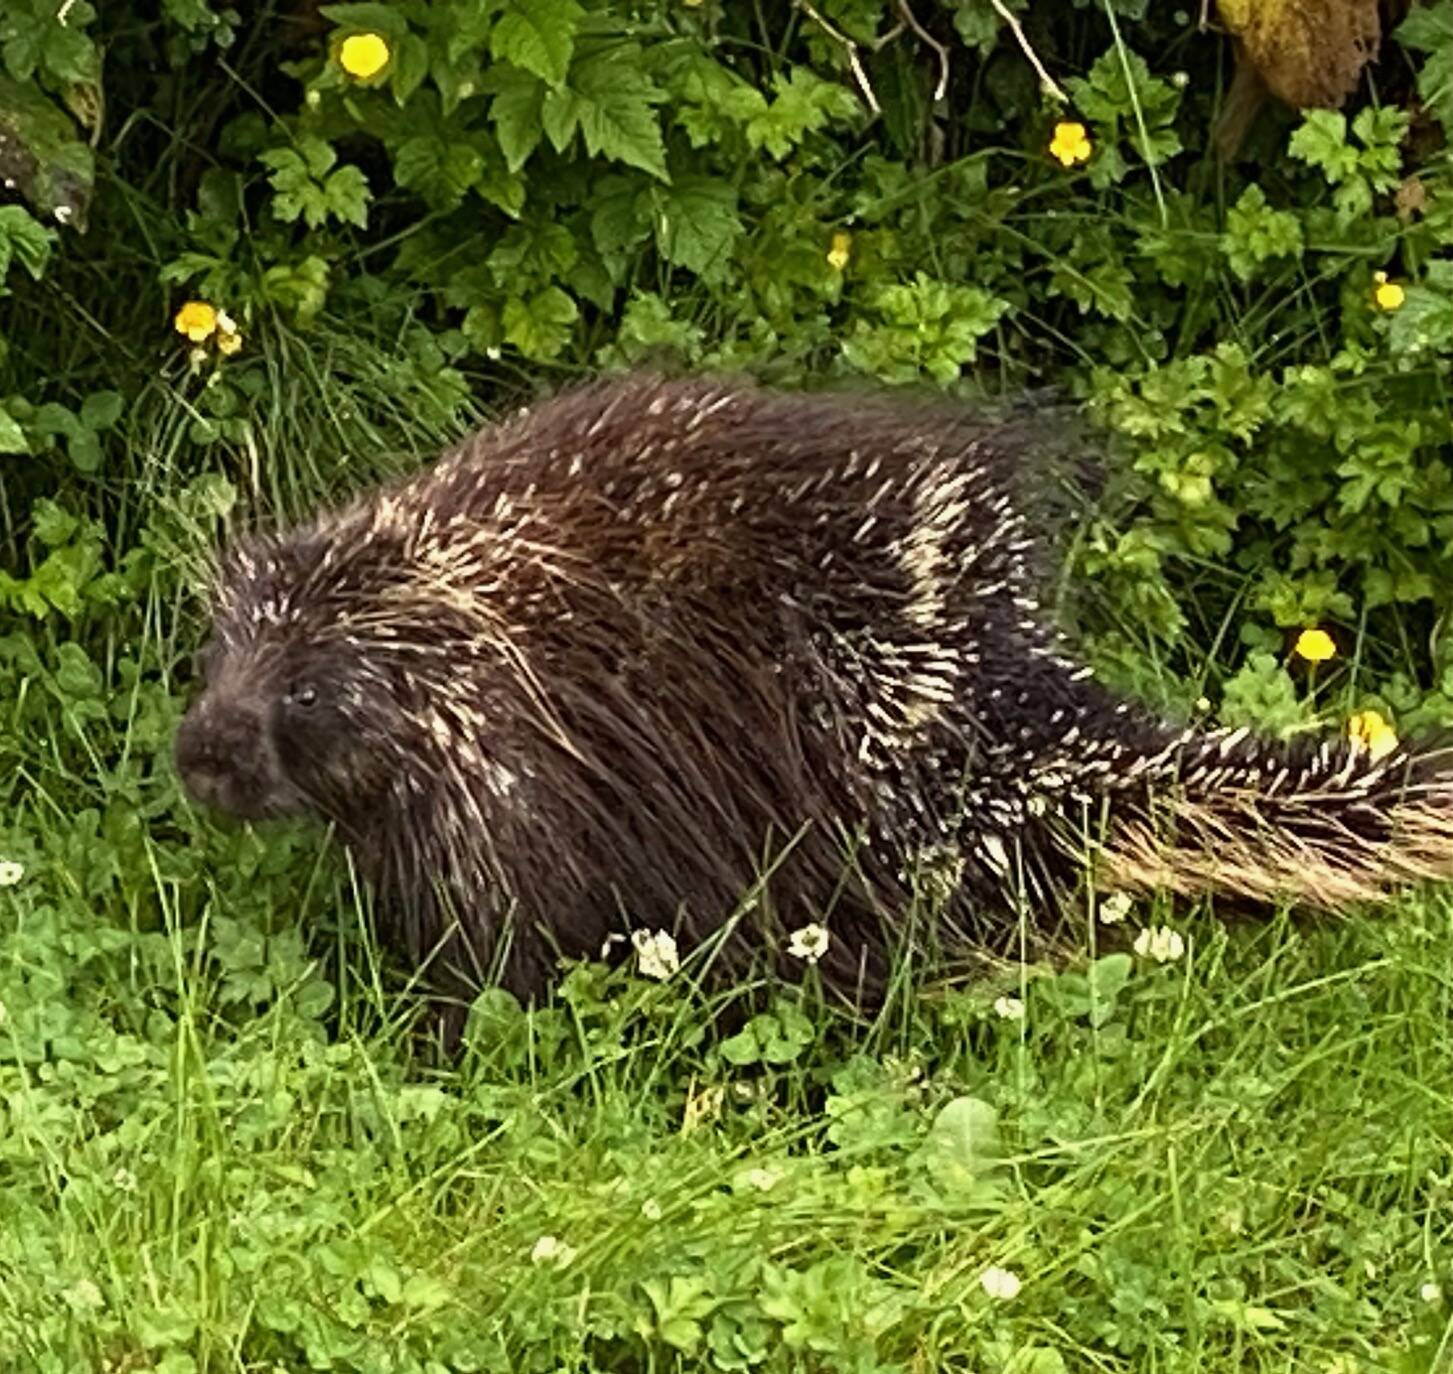 A porcupine glances as a jogger passes along Glacier Highway on June 26. (Photo by Denise Carroll)